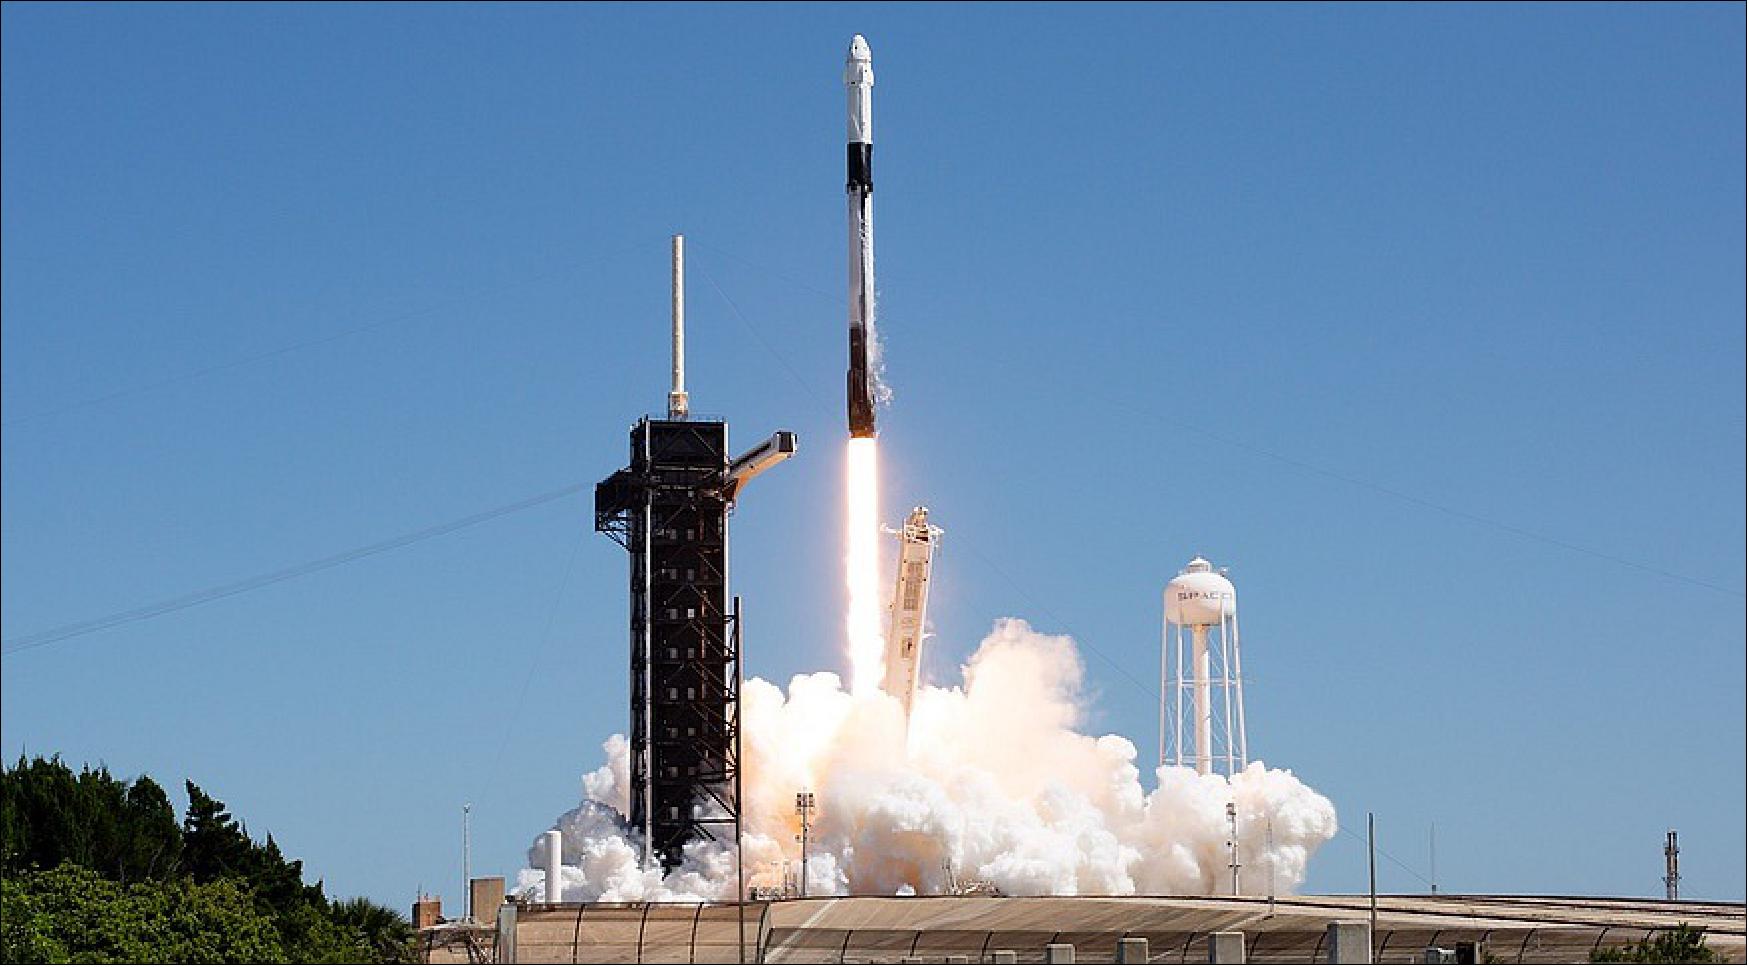 Figure 4: A SpaceX Falcon 9 launches a Crew Dragon spacecraft with four private astronauts on board on the Ax-1 mission for Axiom Space April 8 (image credit: NASA/Joel Kowsky)